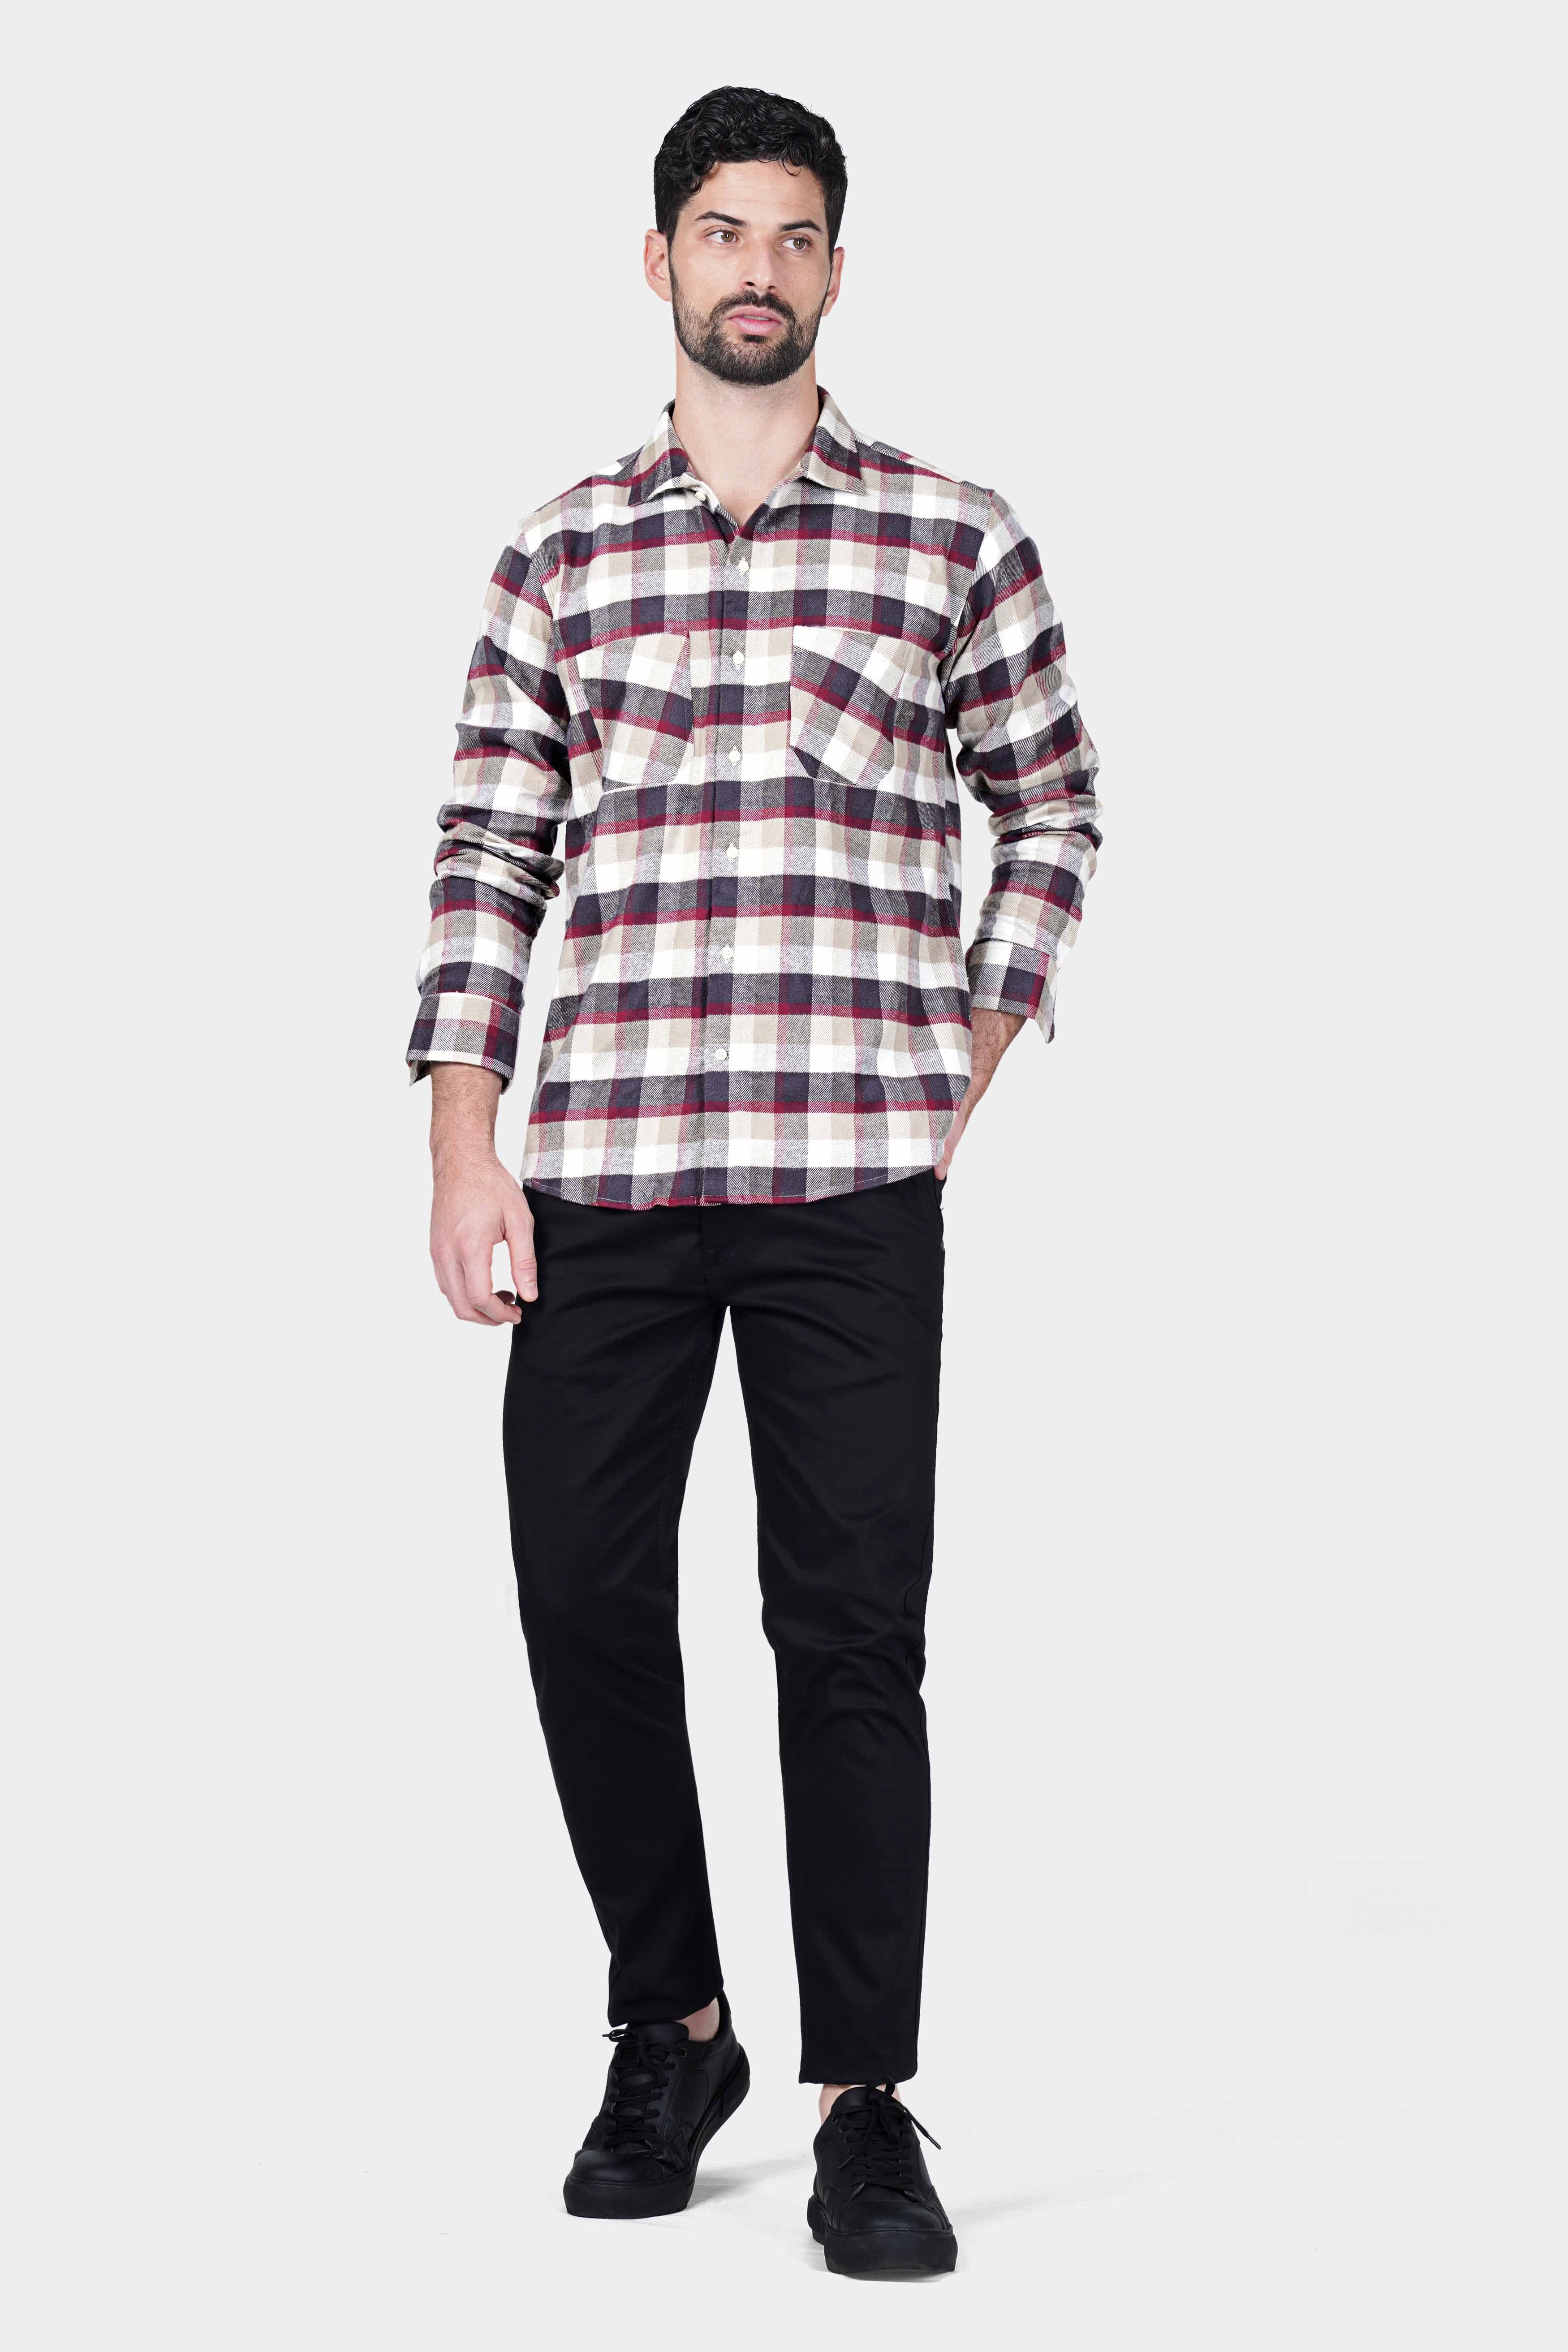 Comet Grey with Merlot Red Checkered and Printed Flannel Designer Shirt 9058-CA-OS-RPRT118-38, 9058-CA-OS-RPRT118-H-38, 9058-CA-OS-RPRT118-39, 9058-CA-OS-RPRT118-H-39, 9058-CA-OS-RPRT118-40, 9058-CA-OS-RPRT118-H-40, 9058-CA-OS-RPRT118-42, 9058-CA-OS-RPRT118-H-42, 9058-CA-OS-RPRT118-44, 9058-CA-OS-RPRT118-H-44, 9058-CA-OS-RPRT118-46, 9058-CA-OS-RPRT118-H-46, 9058-CA-OS-RPRT118-48, 9058-CA-OS-RPRT118-H-48, 9058-CA-OS-RPRT118-50, 9058-CA-OS-RPRT118-H-50, 9058-CA-OS-RPRT118-52, 9058-CA-OS-RPRT118-H-52